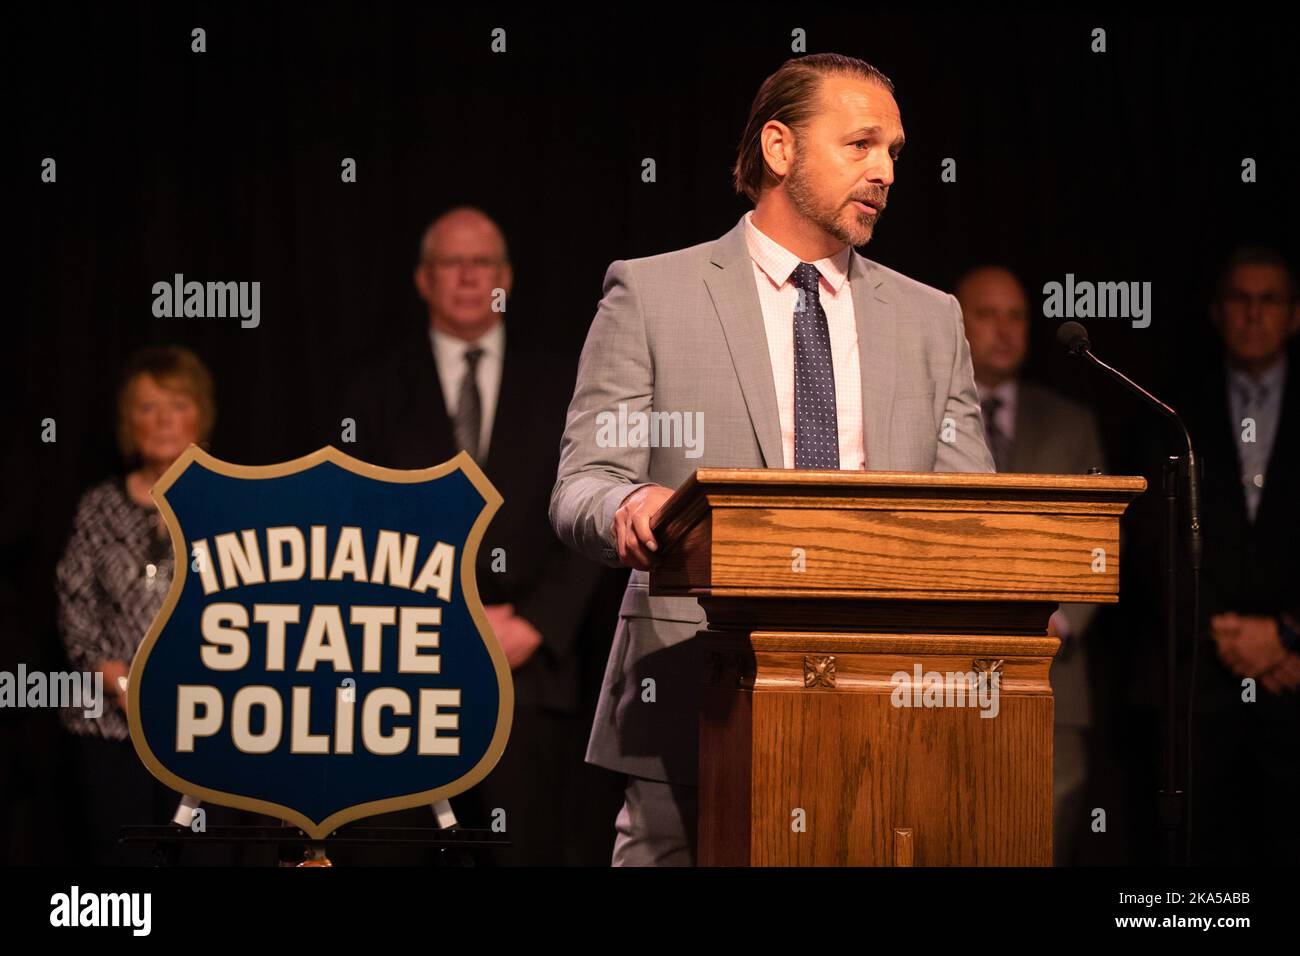 Bloomington, United States. 31st Oct, 2022. Carroll County Prosecutor Nicholas McLeland speaks questions during a press release to announce that Richard M. Allen, of Delphi, has been arrested in the murder case of Abby Williams and Libby German in Delphi. A Delphi, Indiana, man, Richard Allen, has been arrested for the 2017 murders of eighth graders Abby Williams, 13, and Libby German, 14, Indiana State Police Superintendent Doug Carter announced at a press conference. Credit: SOPA Images Limited/Alamy Live News Stock Photo